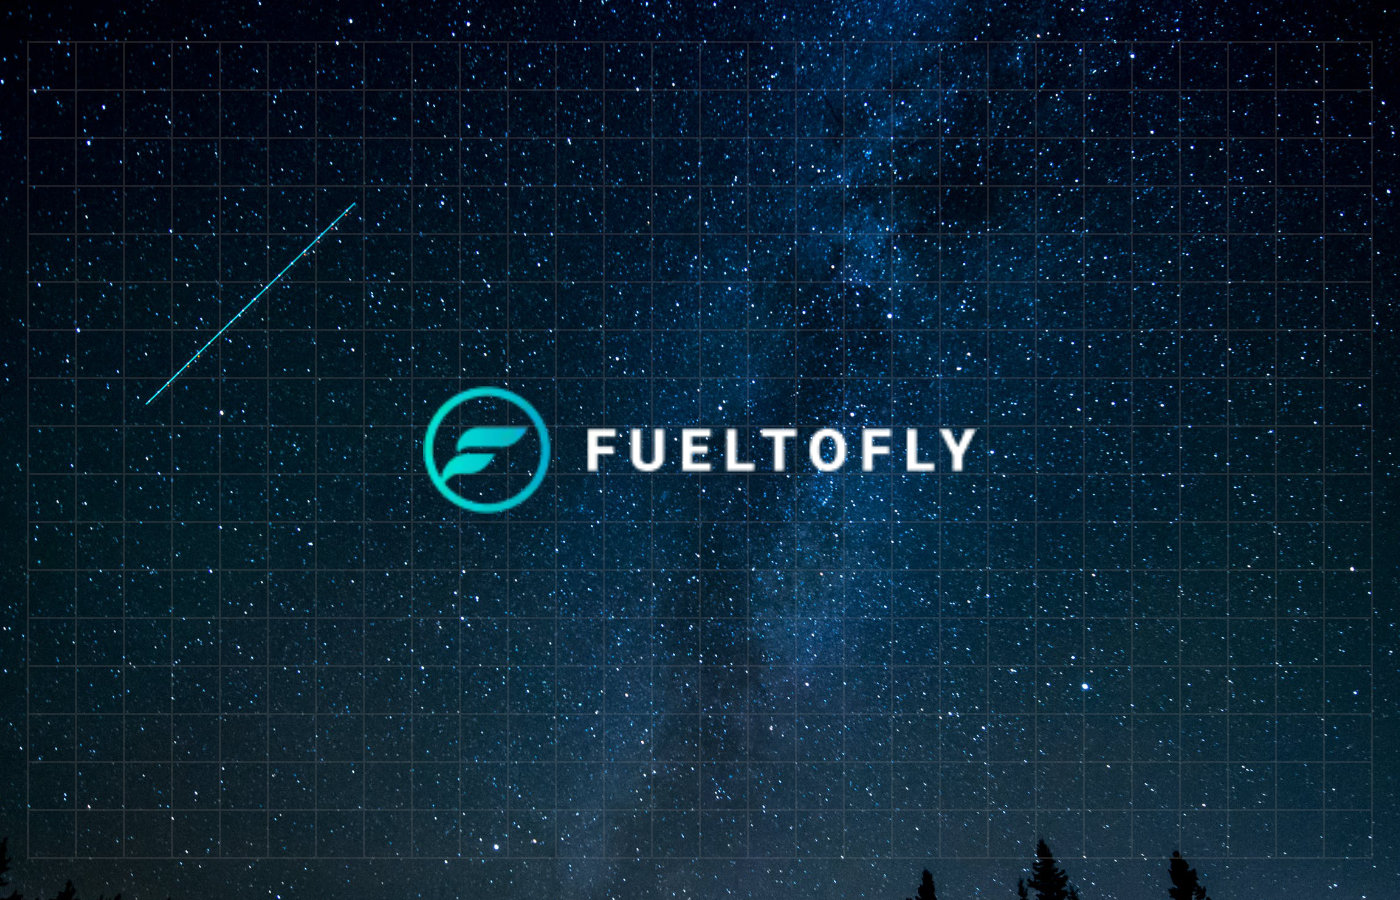 FueltoFly logo introduction image with galaxy milkyway background